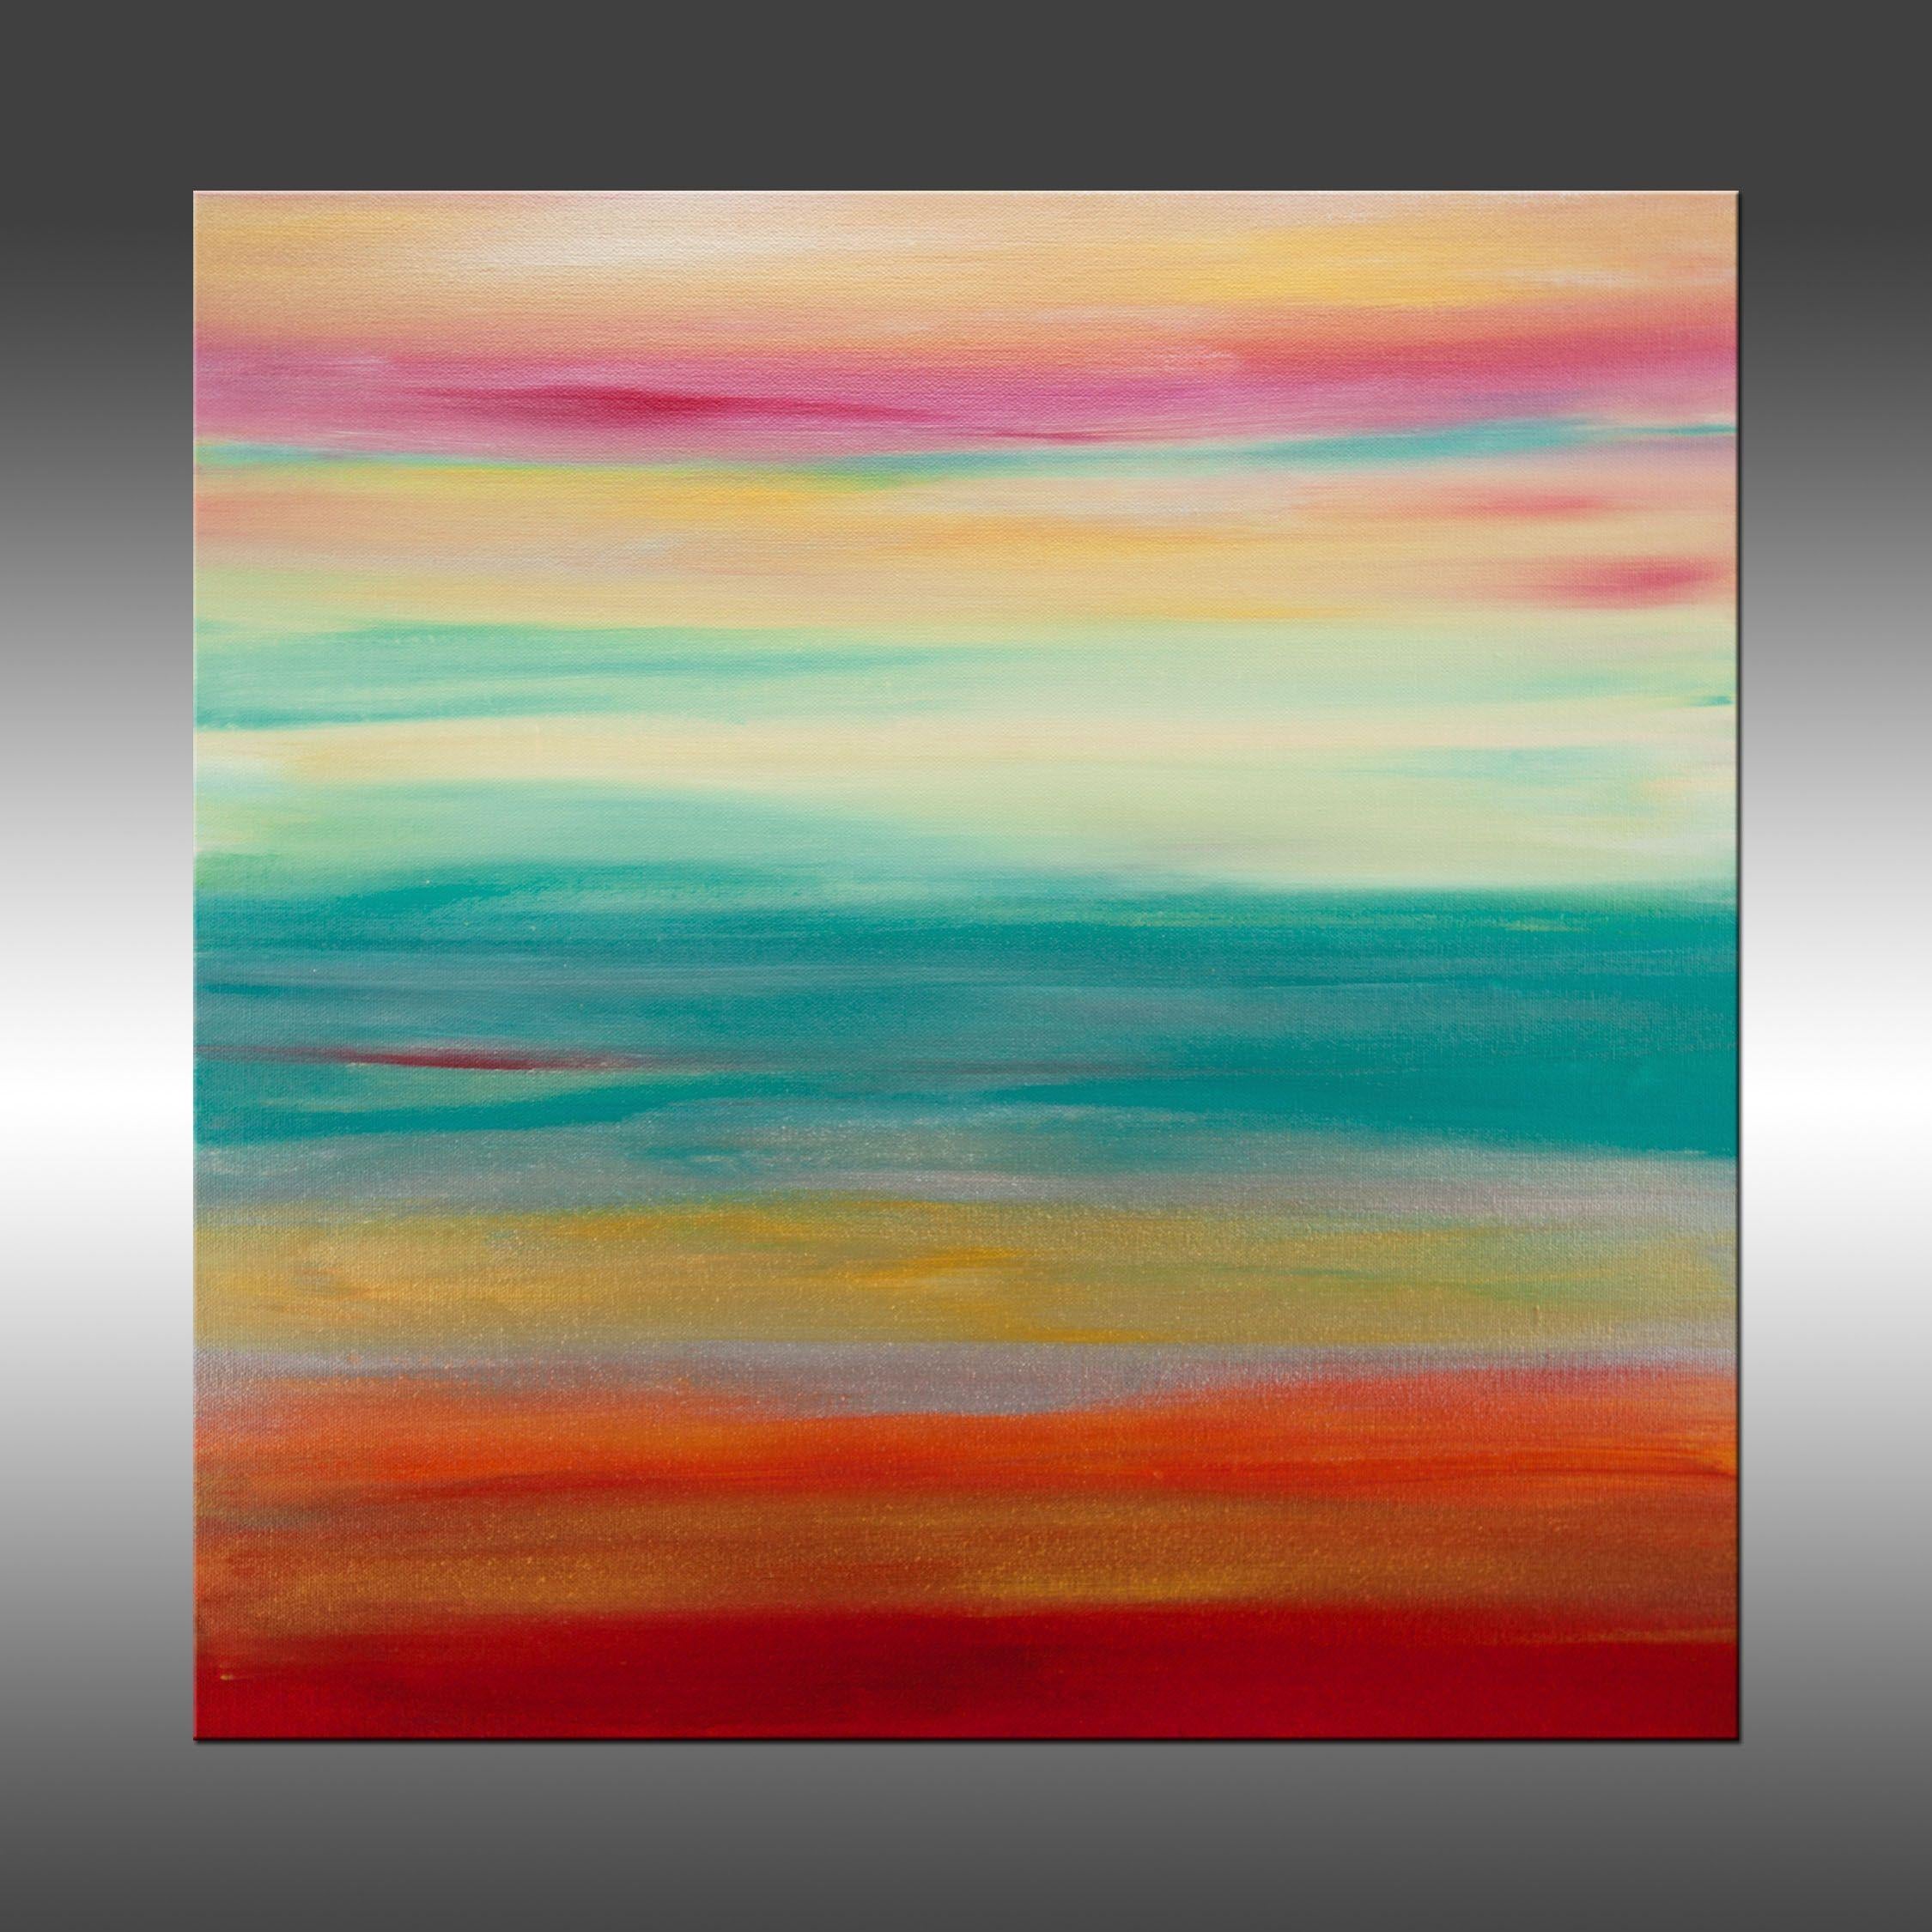 Sunset 59 is an original painting, created with acrylic paint on gallery-wrapped canvas. It has a width of 20 inches and a height of 20 inches with a depth of 1.5 inches (20x20x1.5).     The colors used in the painting are red, turquoise, off-white,